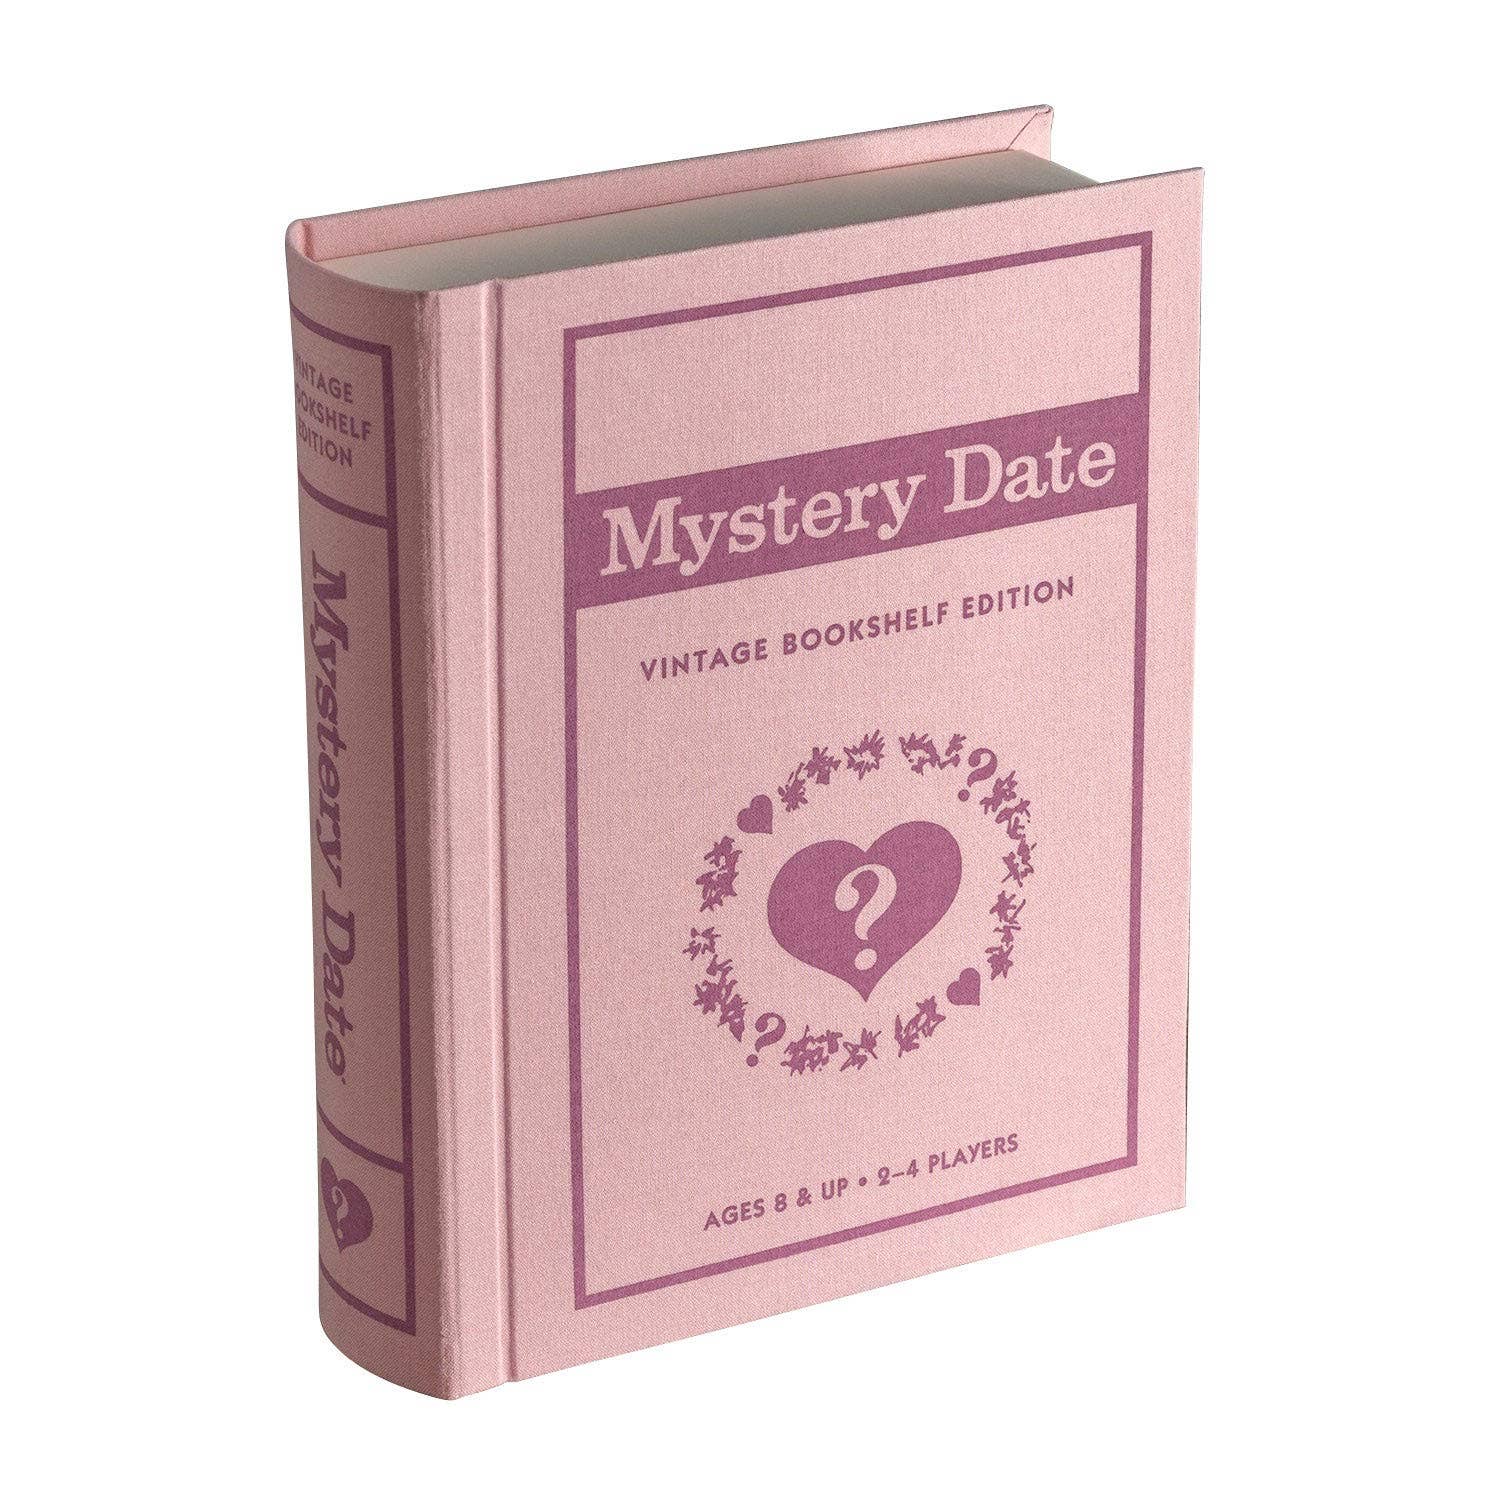 WS Game Company - WS Game Company Mystery Date Vintage Bookshelf Edition - Bards & Cards